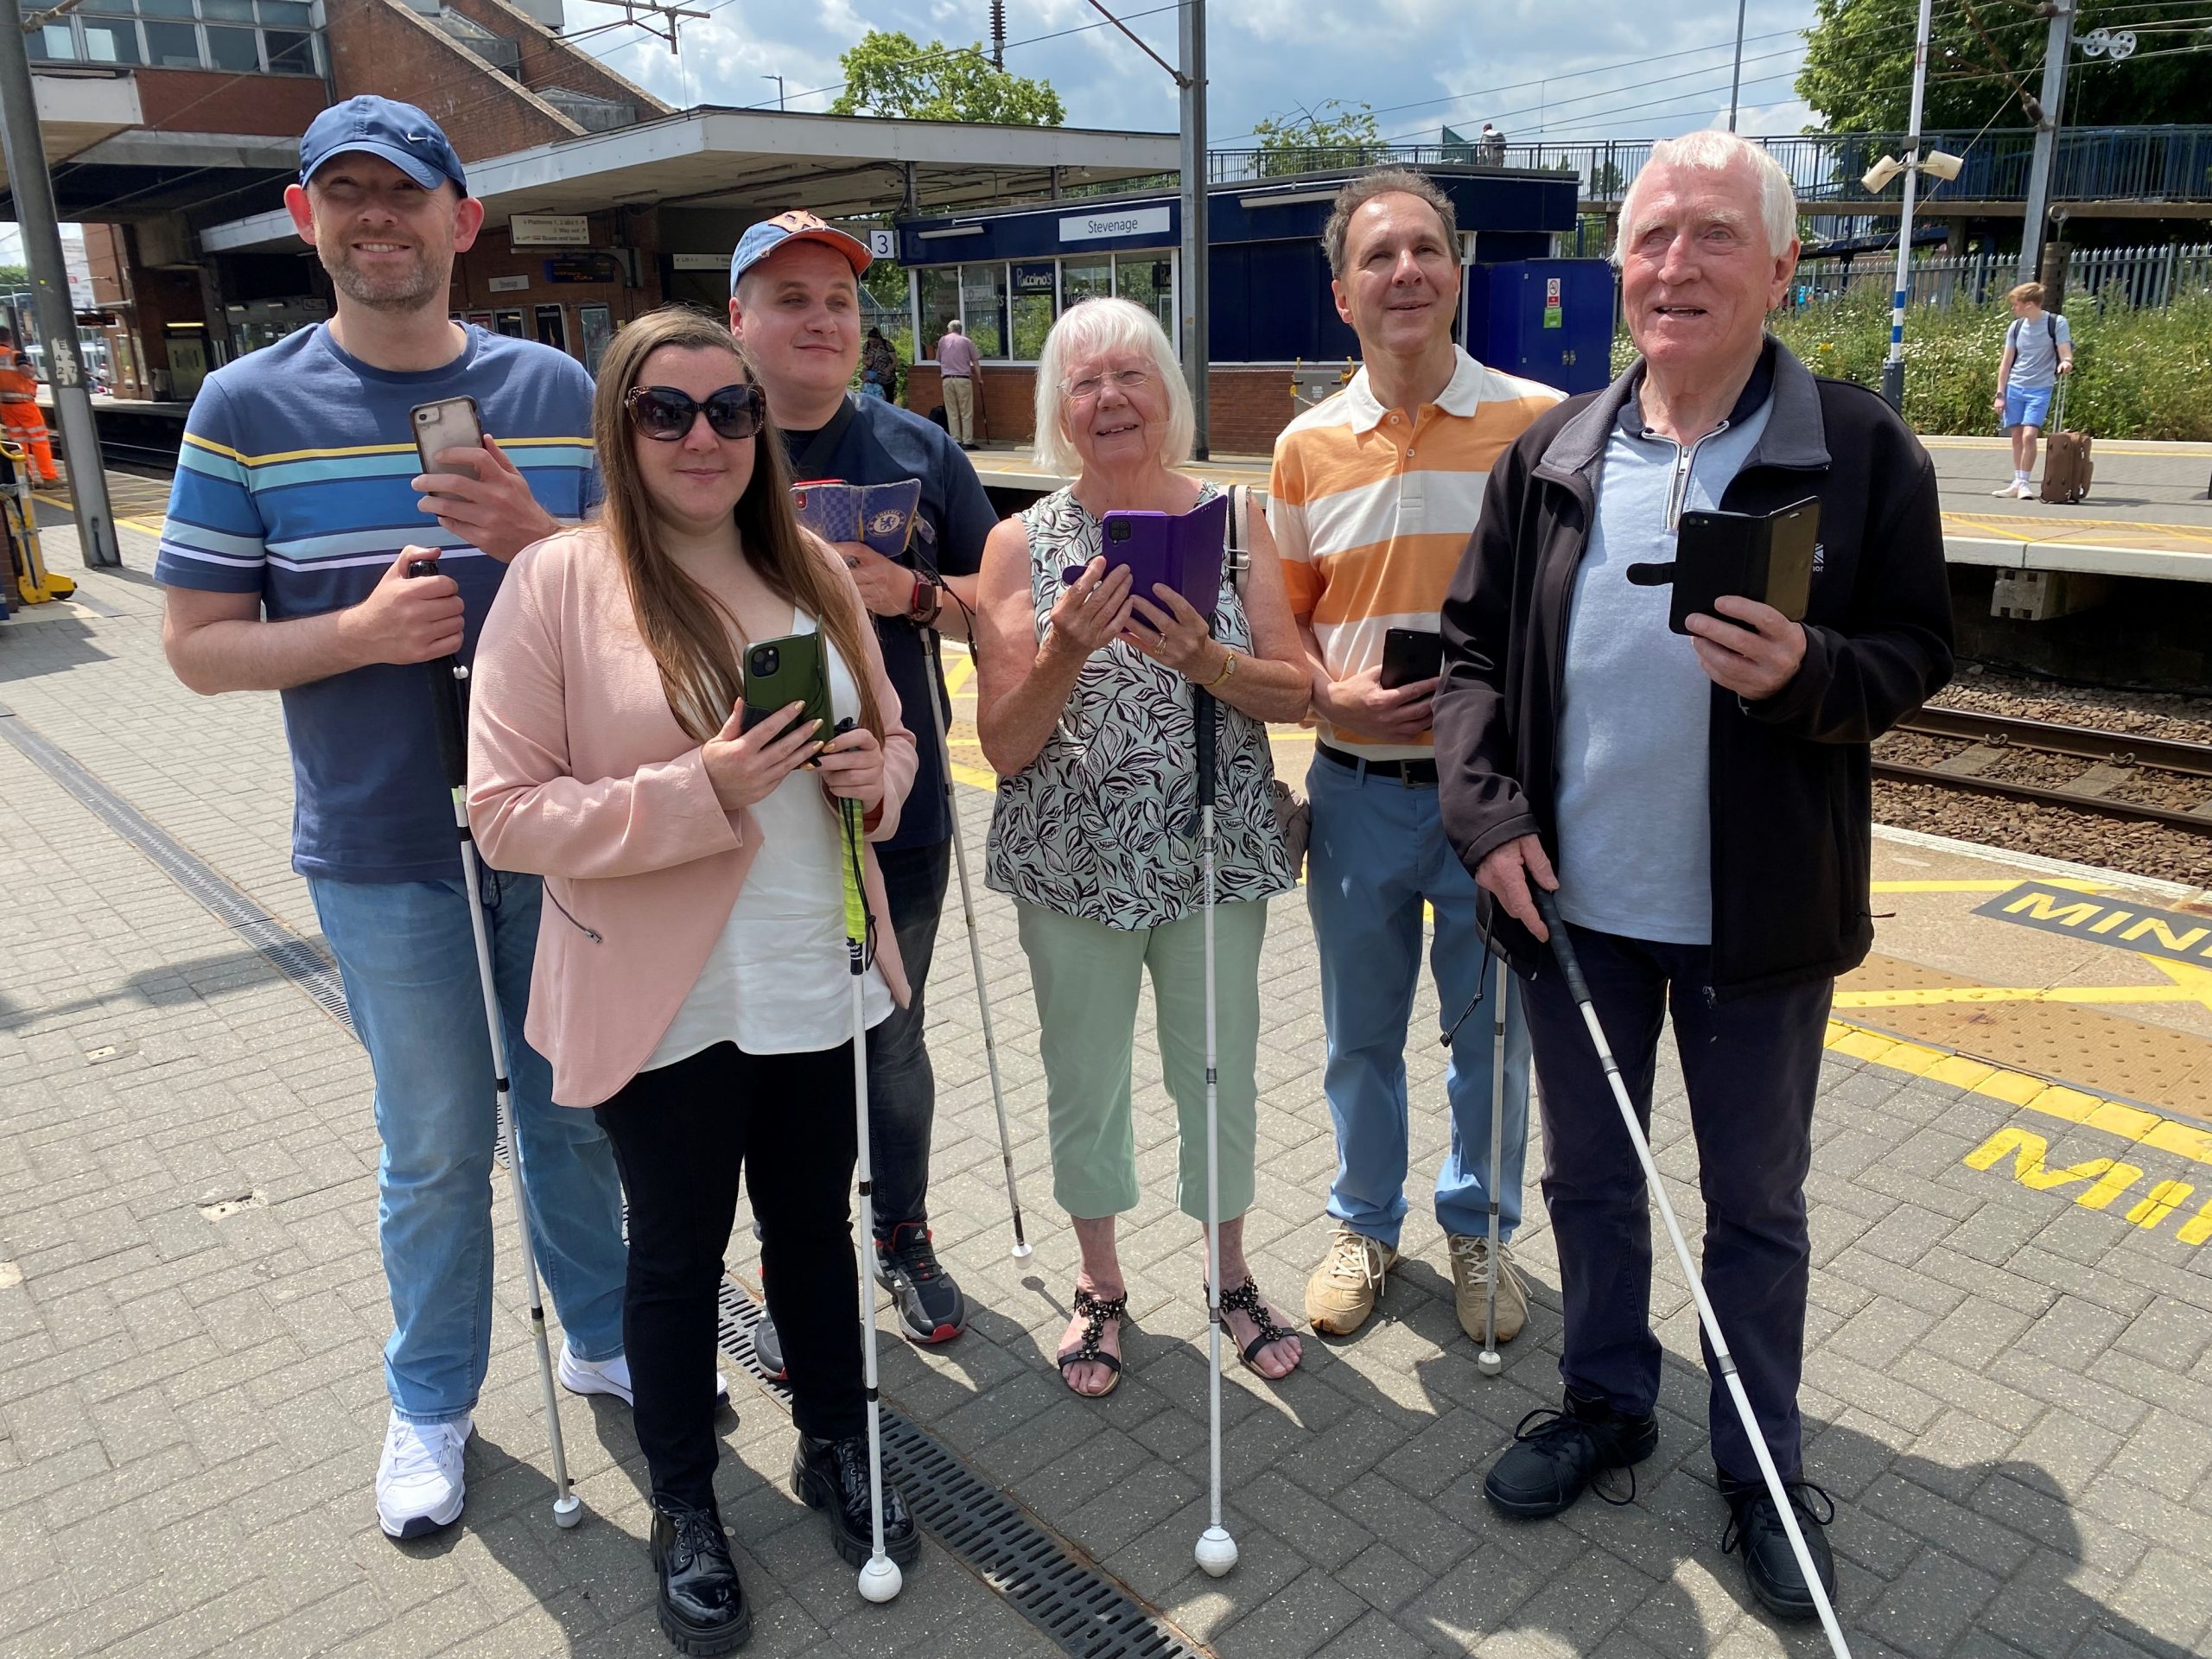 Members of Bedfordshire SLC are stood with Samantha Leftwich, Engagement Manager for East England. They are stood on a platform at Stevenage train station as part of the Aira trial. They are all holding their smartphones in one hand, their long cane in the other.